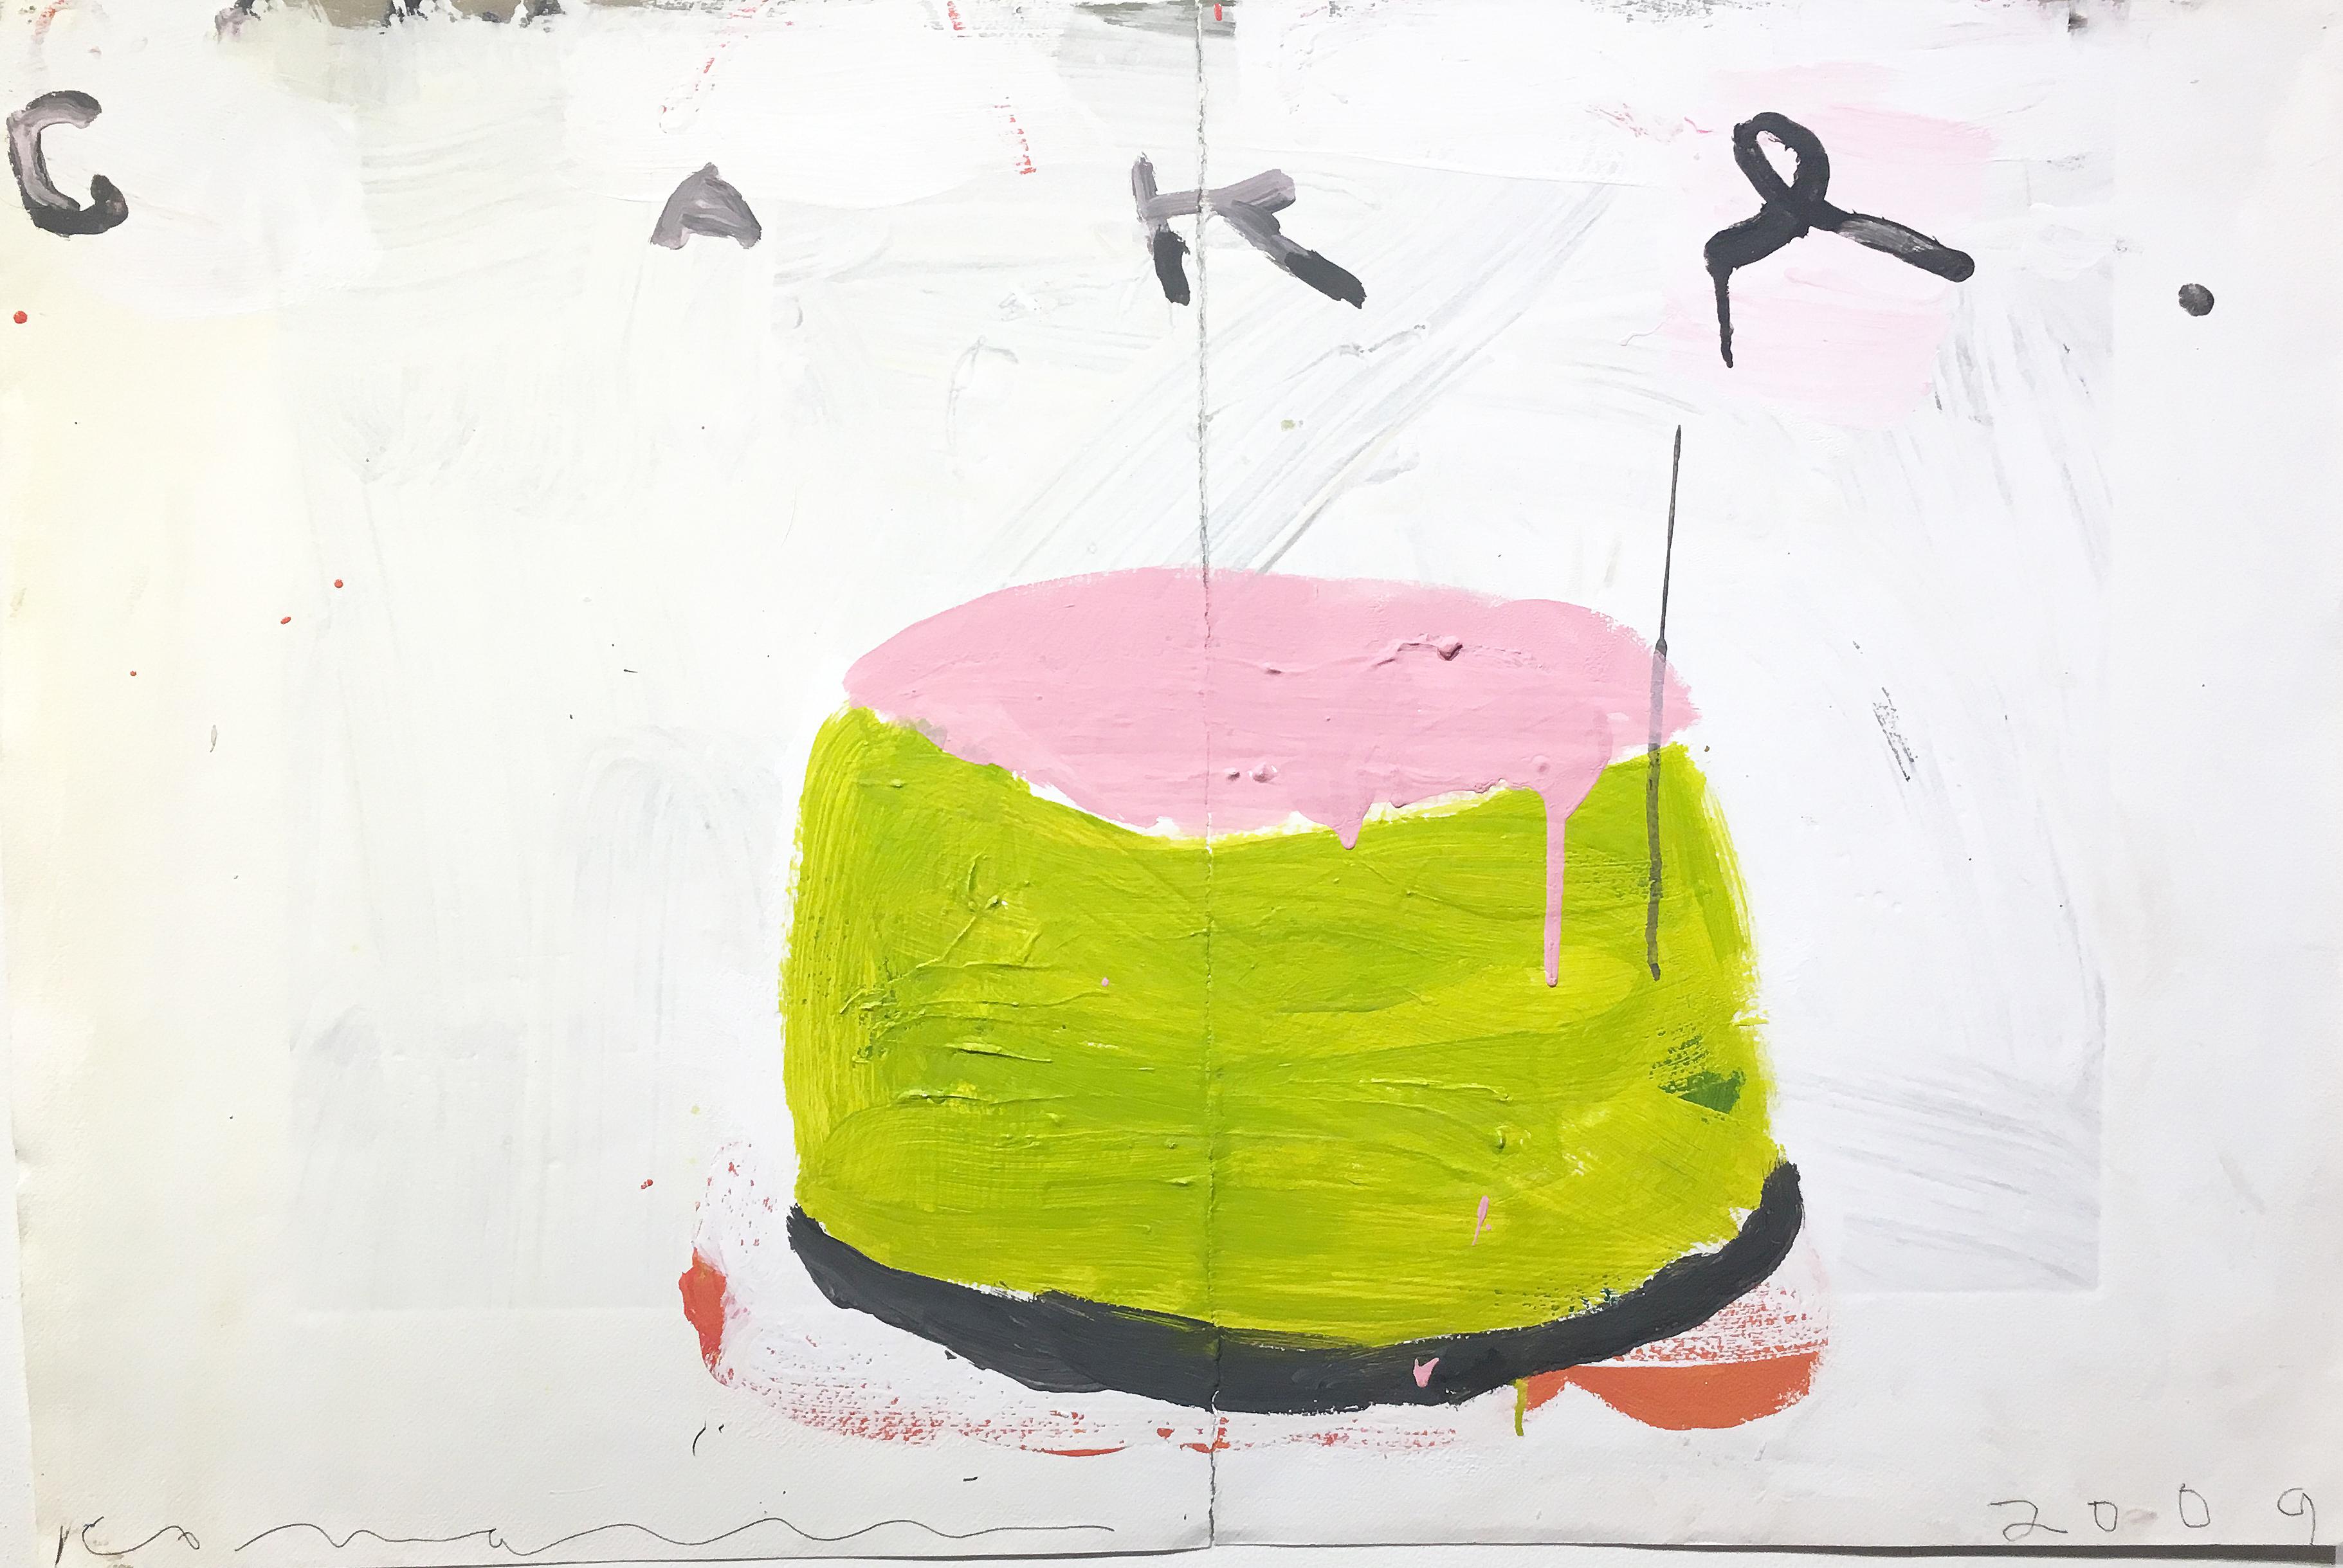 'Cake (Pink & Lime)' 2009 by American artist, Gary Komarin. Mixed media on paper, 20.50 x 30.50 in. Cakes are among Komarin’s most recognizable idiosyncratic images. This faux naive work on paper features a 1-tier cake painted in vivid colors of